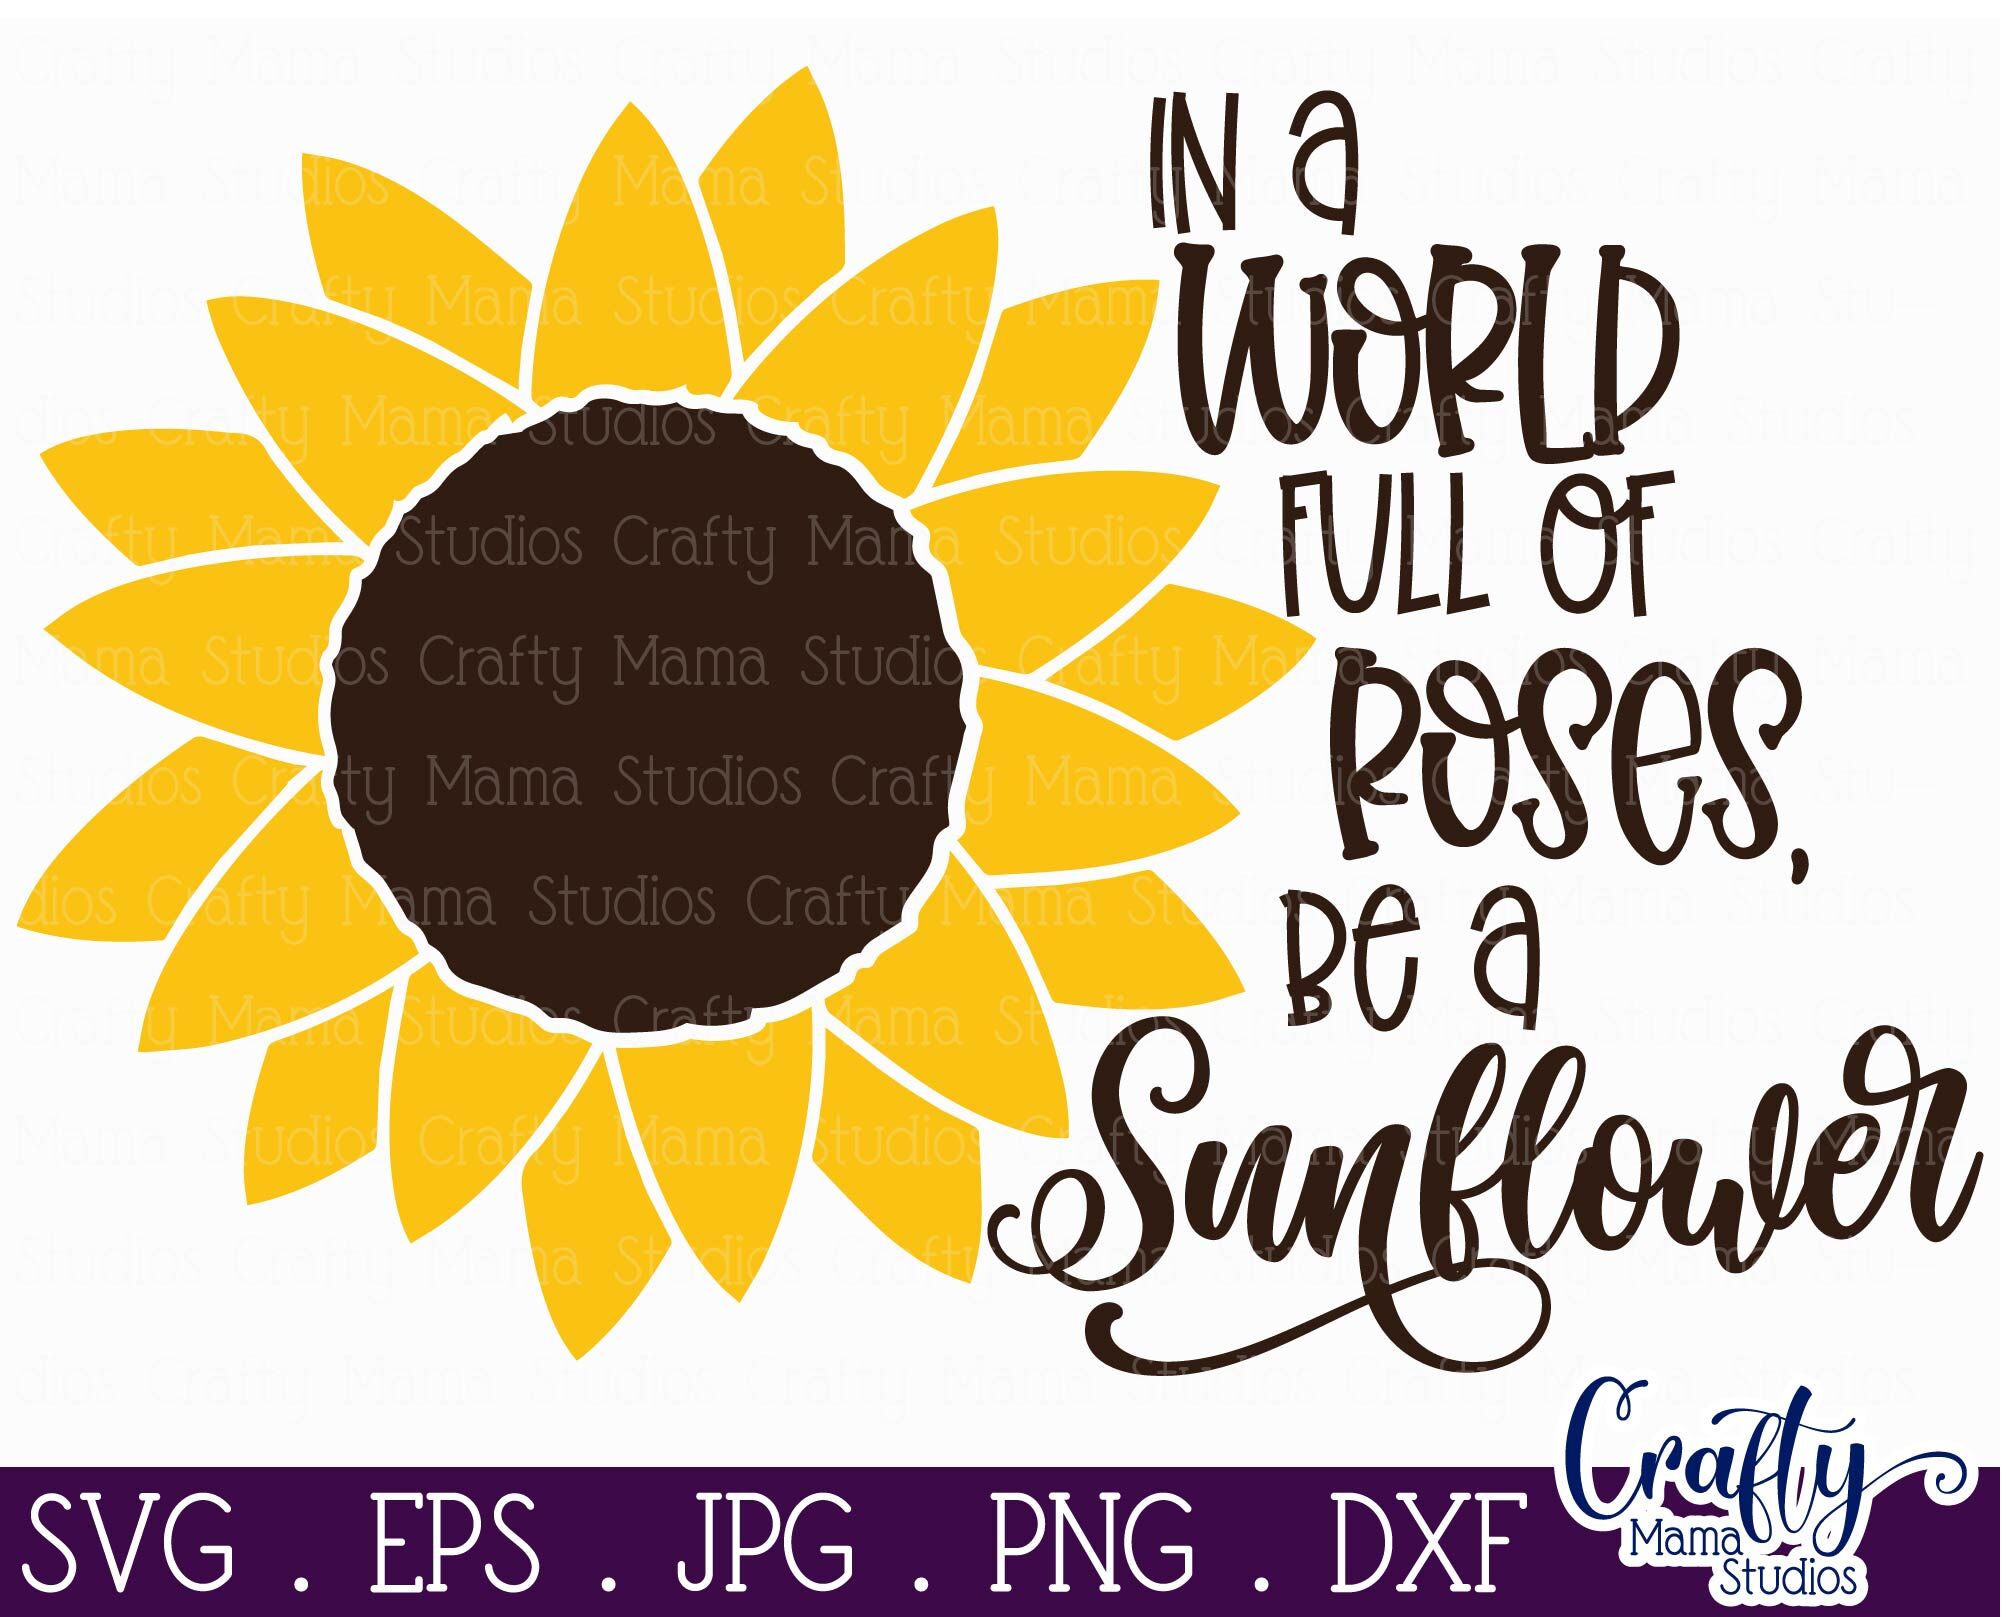 Sunflower Svg Sunflower Quote In A World Full Of Roses By Crafty Mama Studios Thehungryjpeg Com